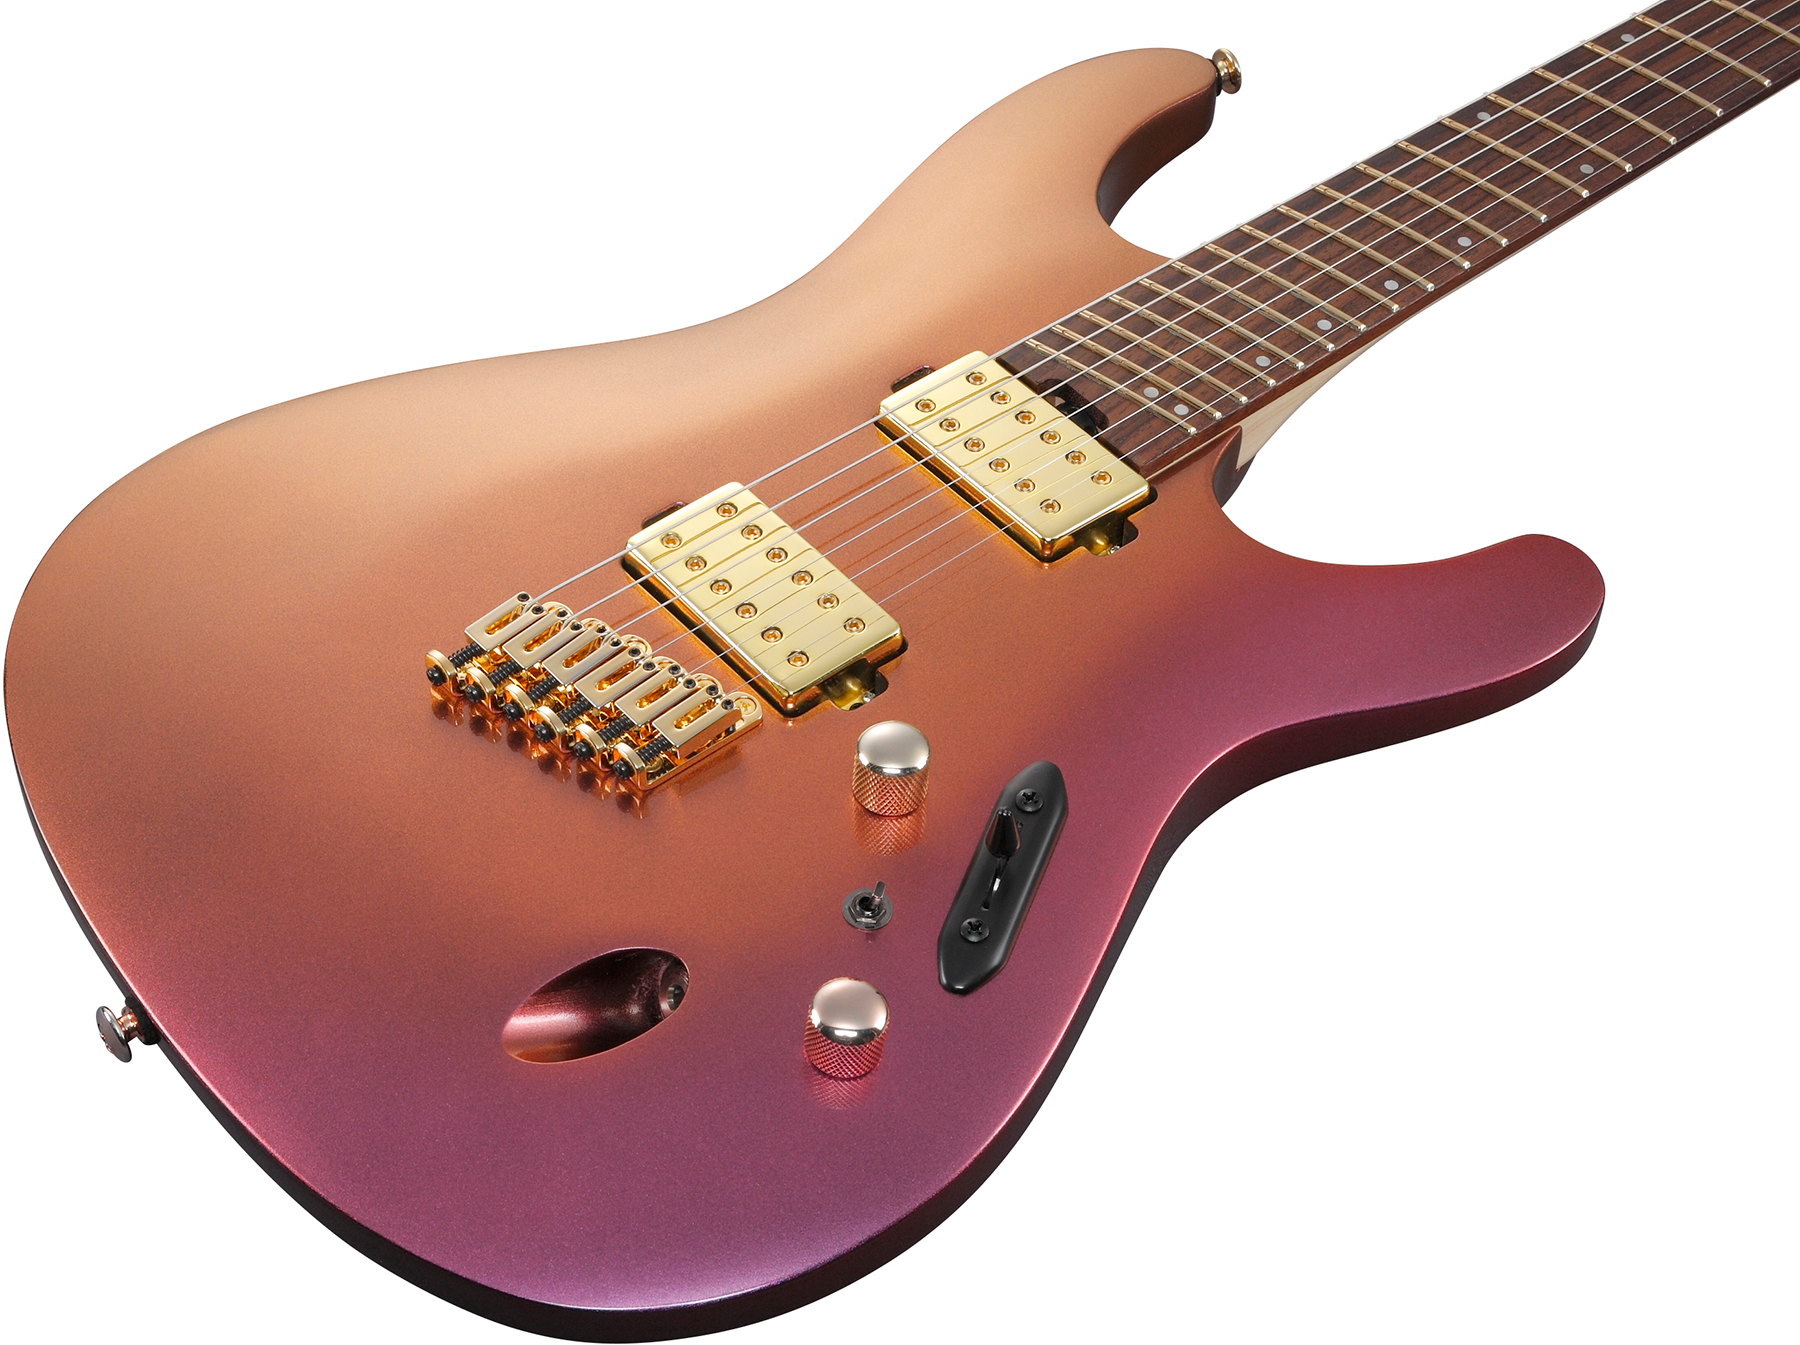 Ibanez Sml721 Rgc Axe Design Lab Multiscale 2h Ht Rw - Rose Gold Chameleon - Multi-Scale Guitar - Variation 2